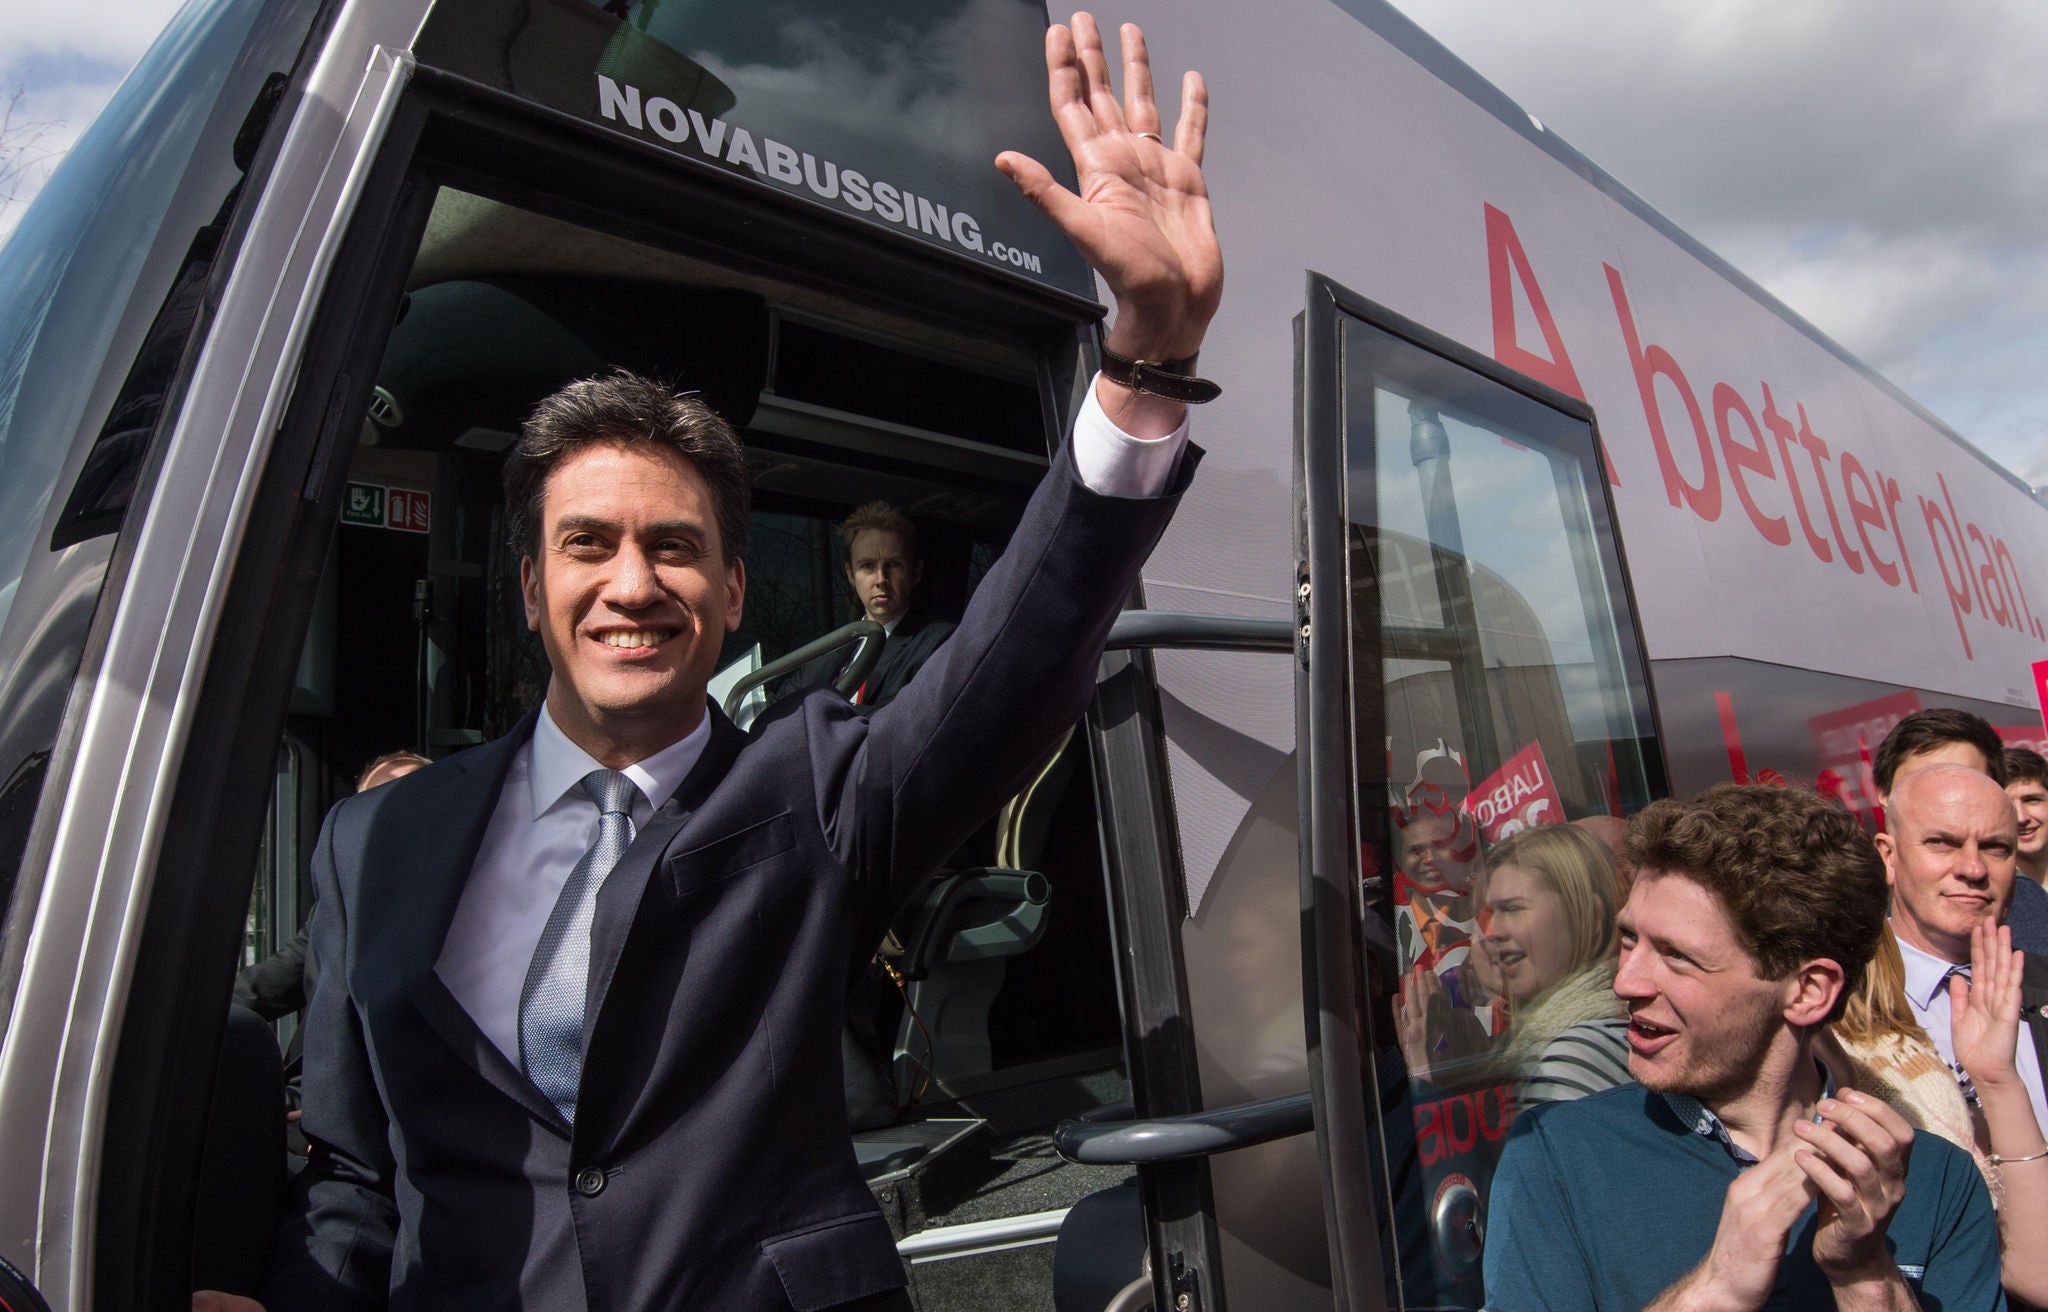 Ed Miliband waves to the crowds as he steps on to Labour's battlebus (PA)